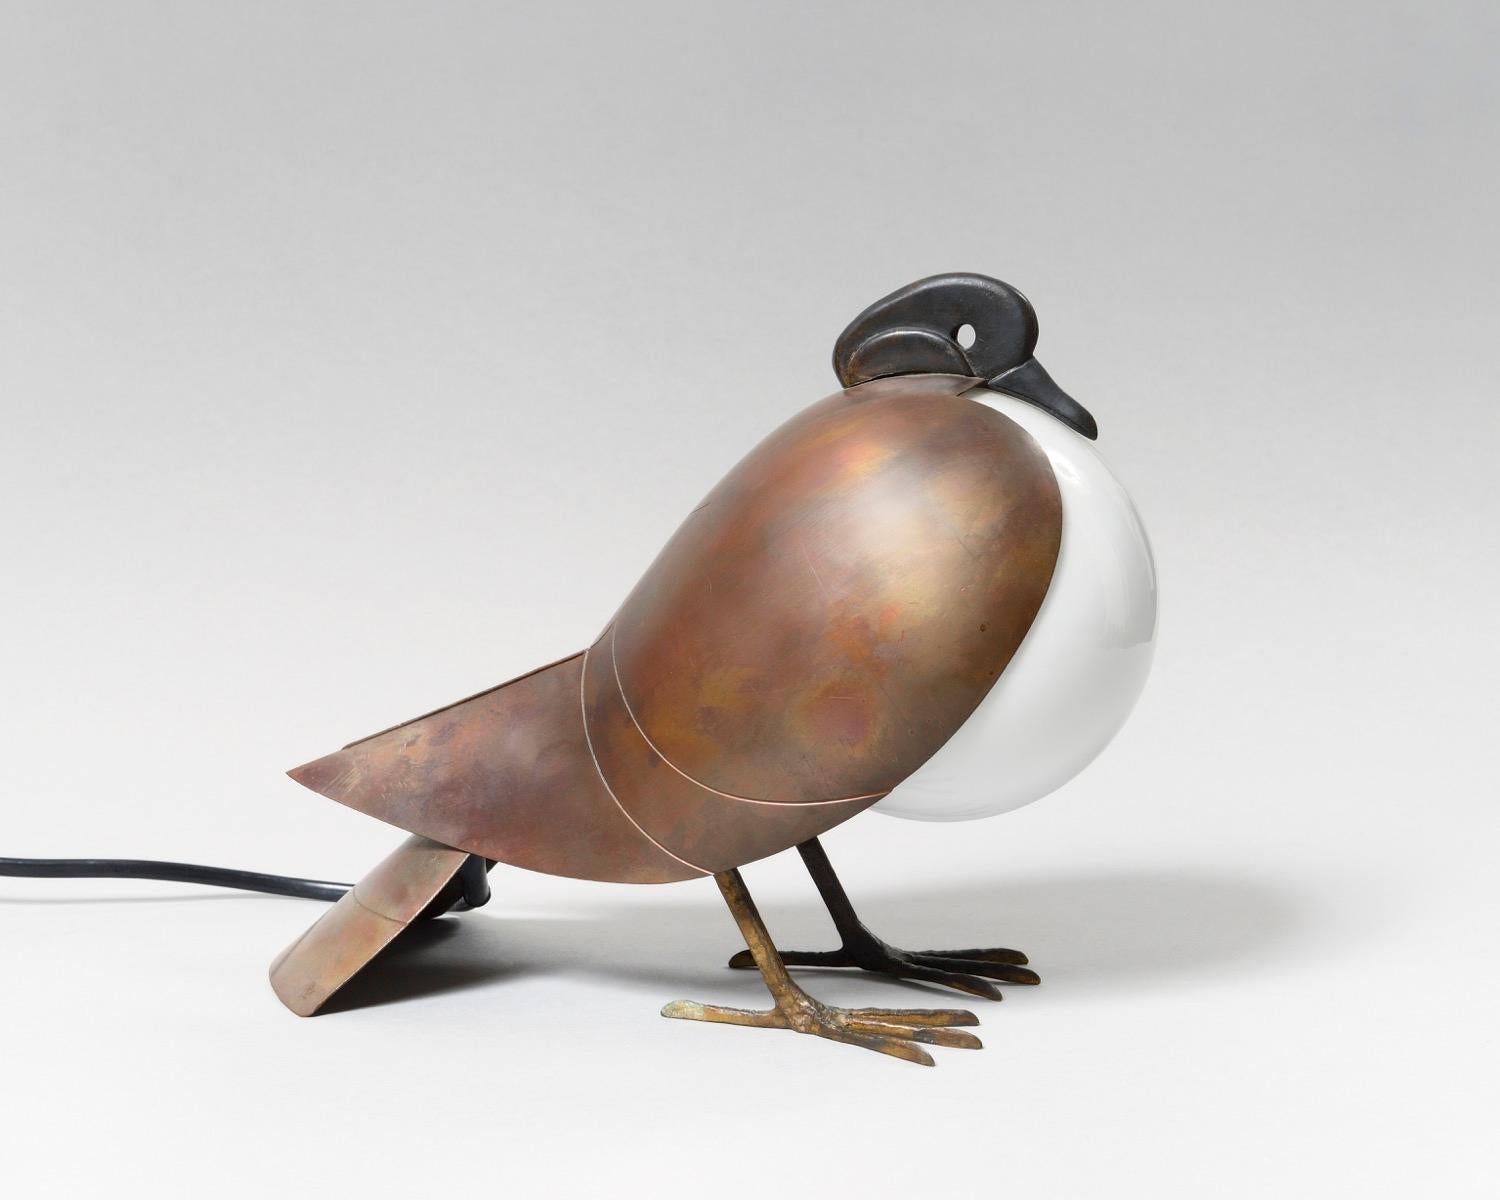 François-Xavier Lalanne
“Pigeon” table lamp
Patinated bronze, patinated copper, and opal glass; monogrammed, numbered, and with the editor's mark ARTCURIAL on the tail.
Measures: 22 x 25 x 15 cm
ARTCURIAL certificate.